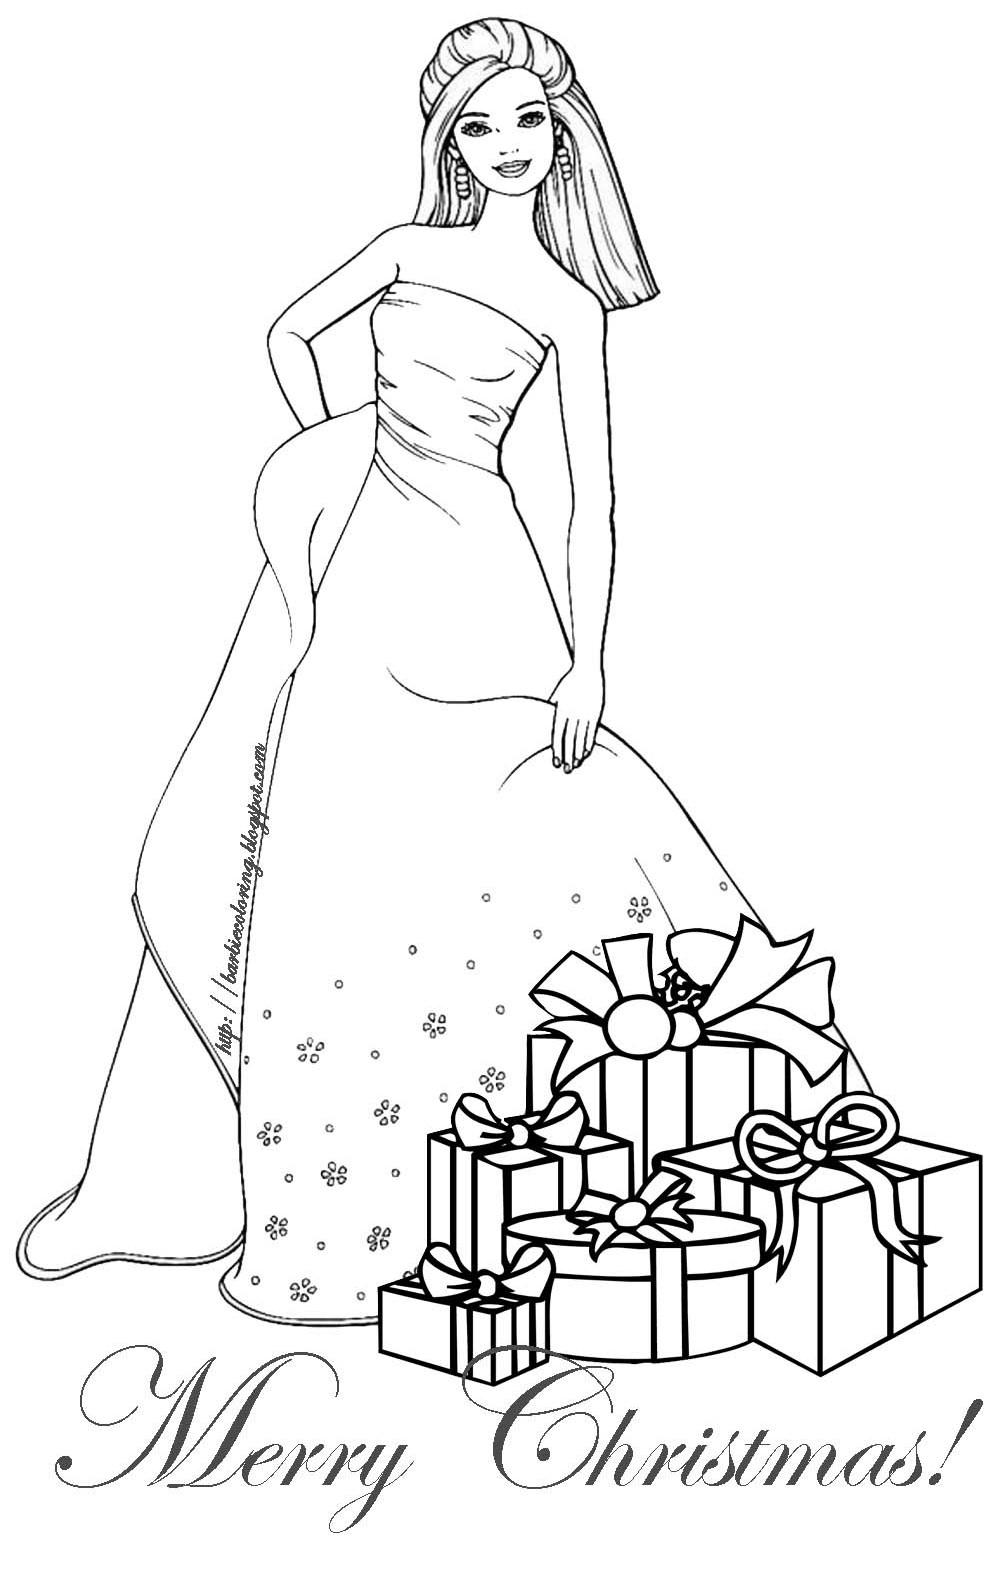  Barbie Coloring Pages Christmas | Coloring pages for Christmas | Christmas trees coloring pages